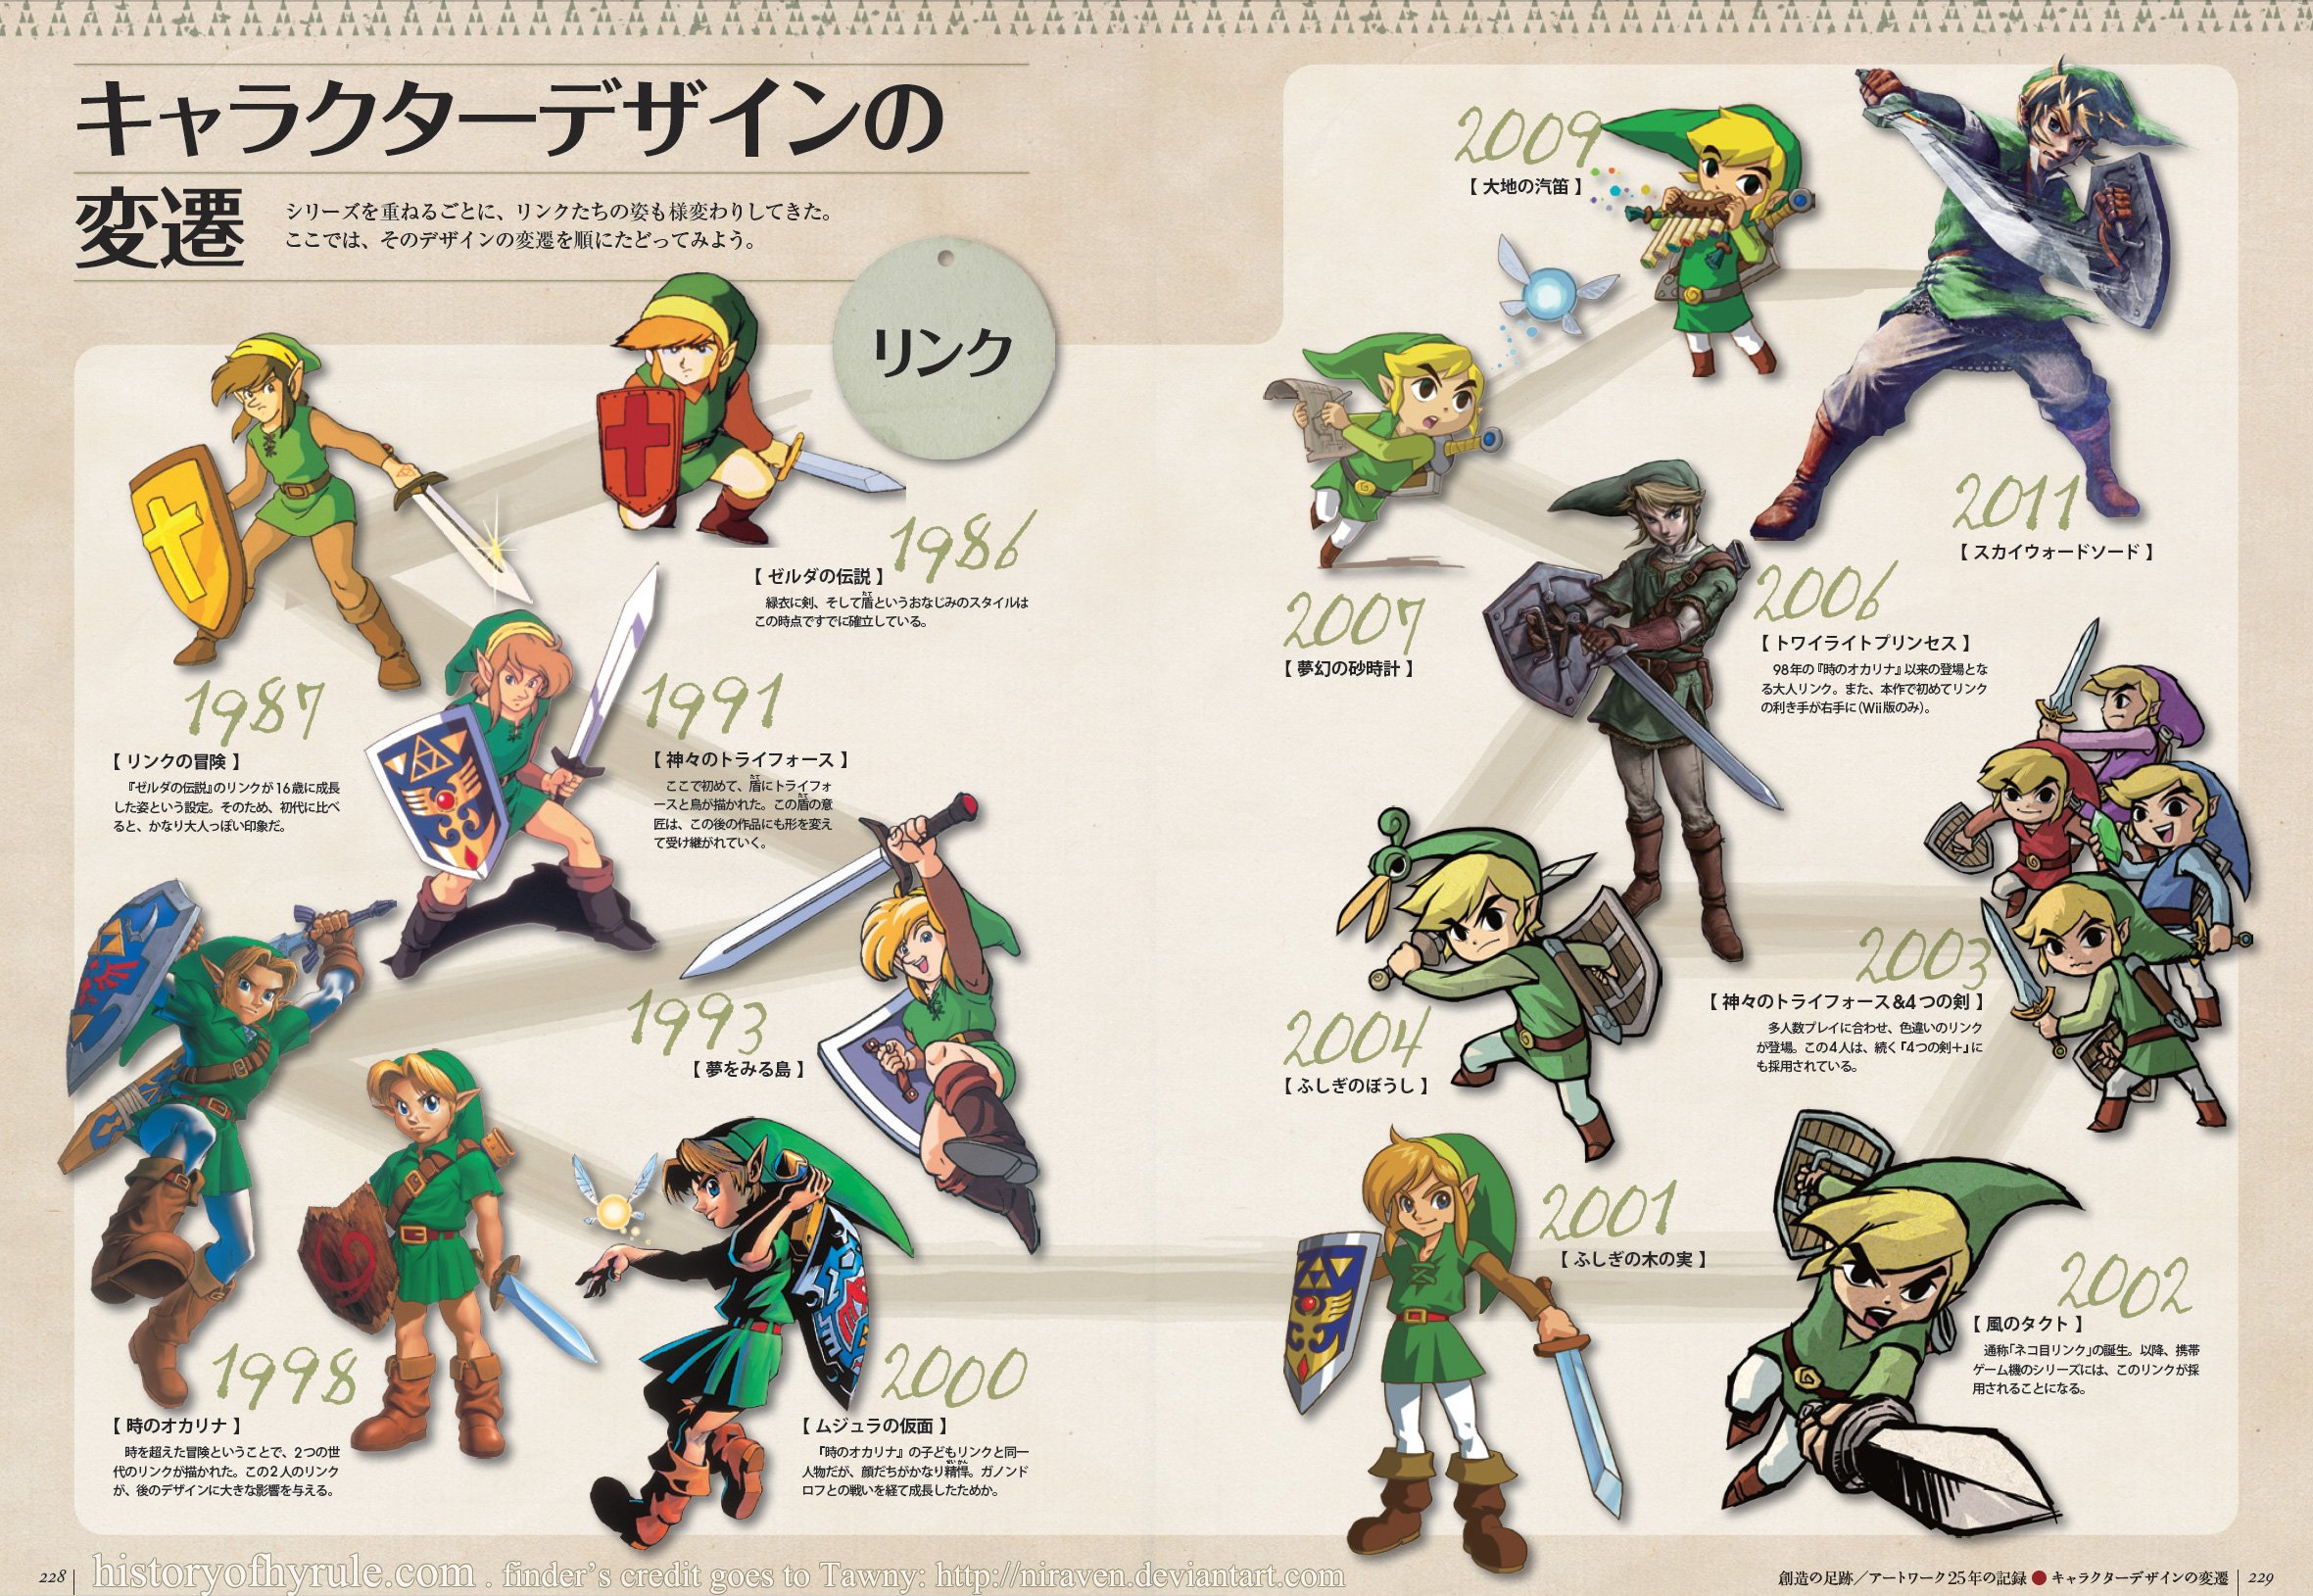 The Legend Of The Legend Of Zelda Timeline Theory Churchmag